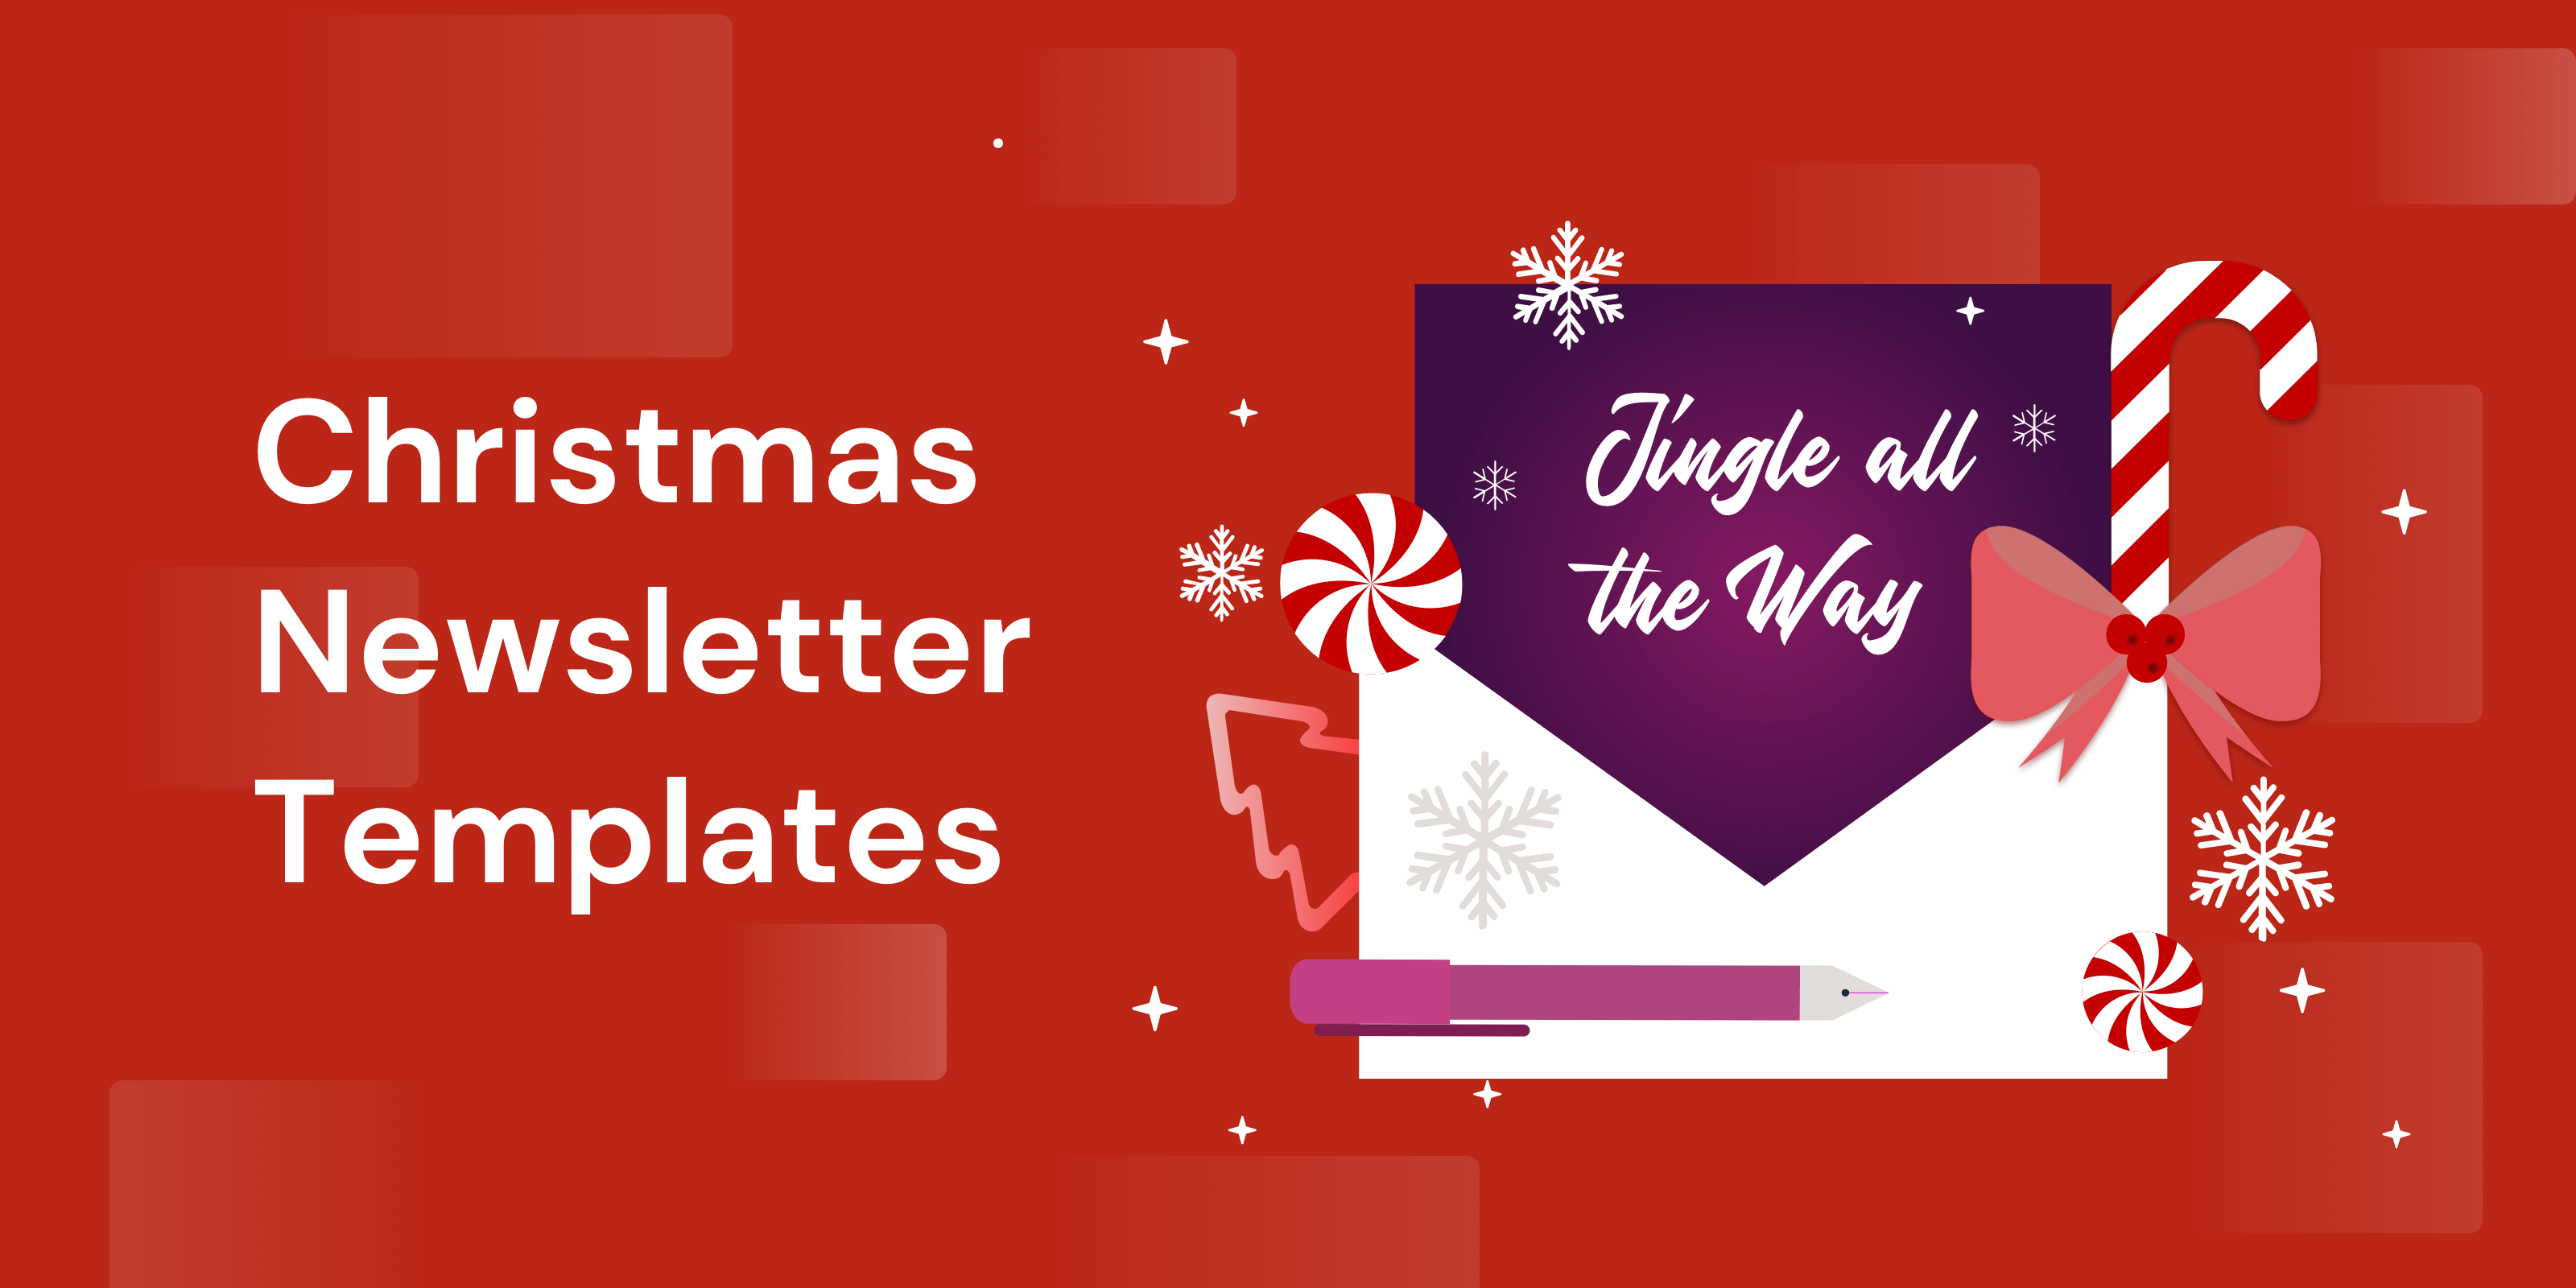 6 Effective Christmas Newsletter Templates For Your Business